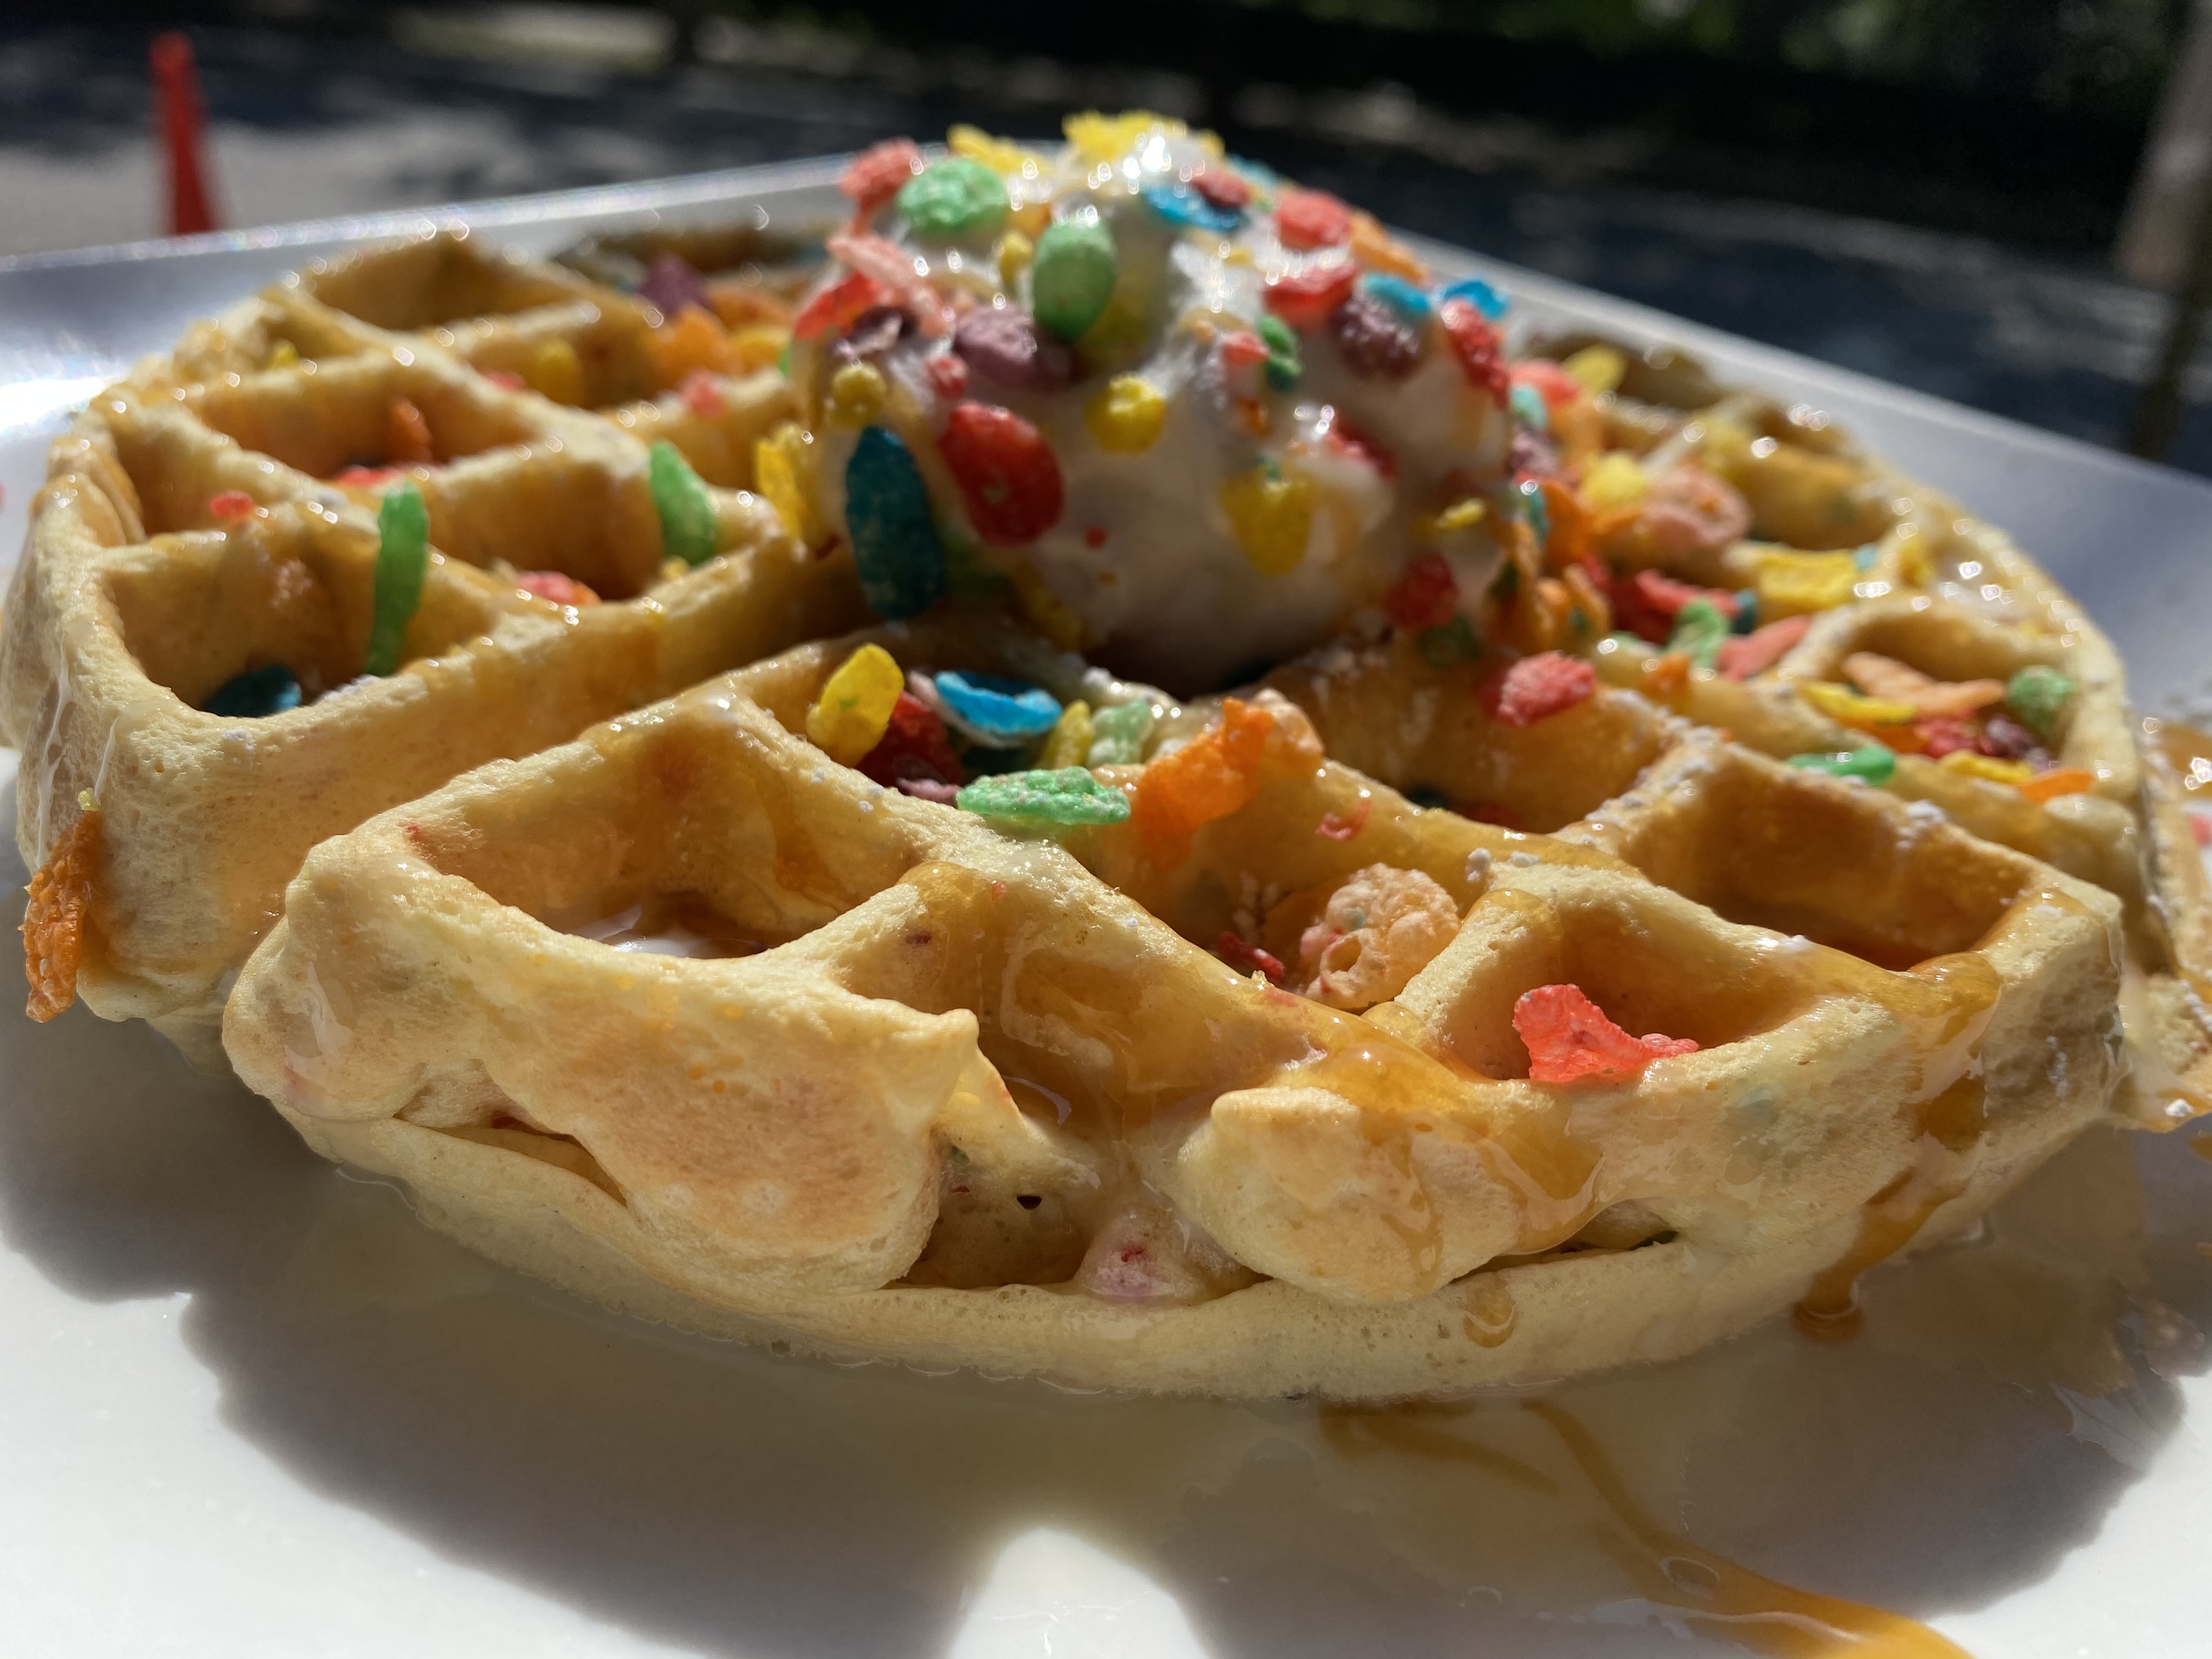 Only available during Brunch - we bring back some childhood favorites and combine them with our Nooktastic Waffles! This week we're serving up our AMAZING Fruity Pebbles Waffle!